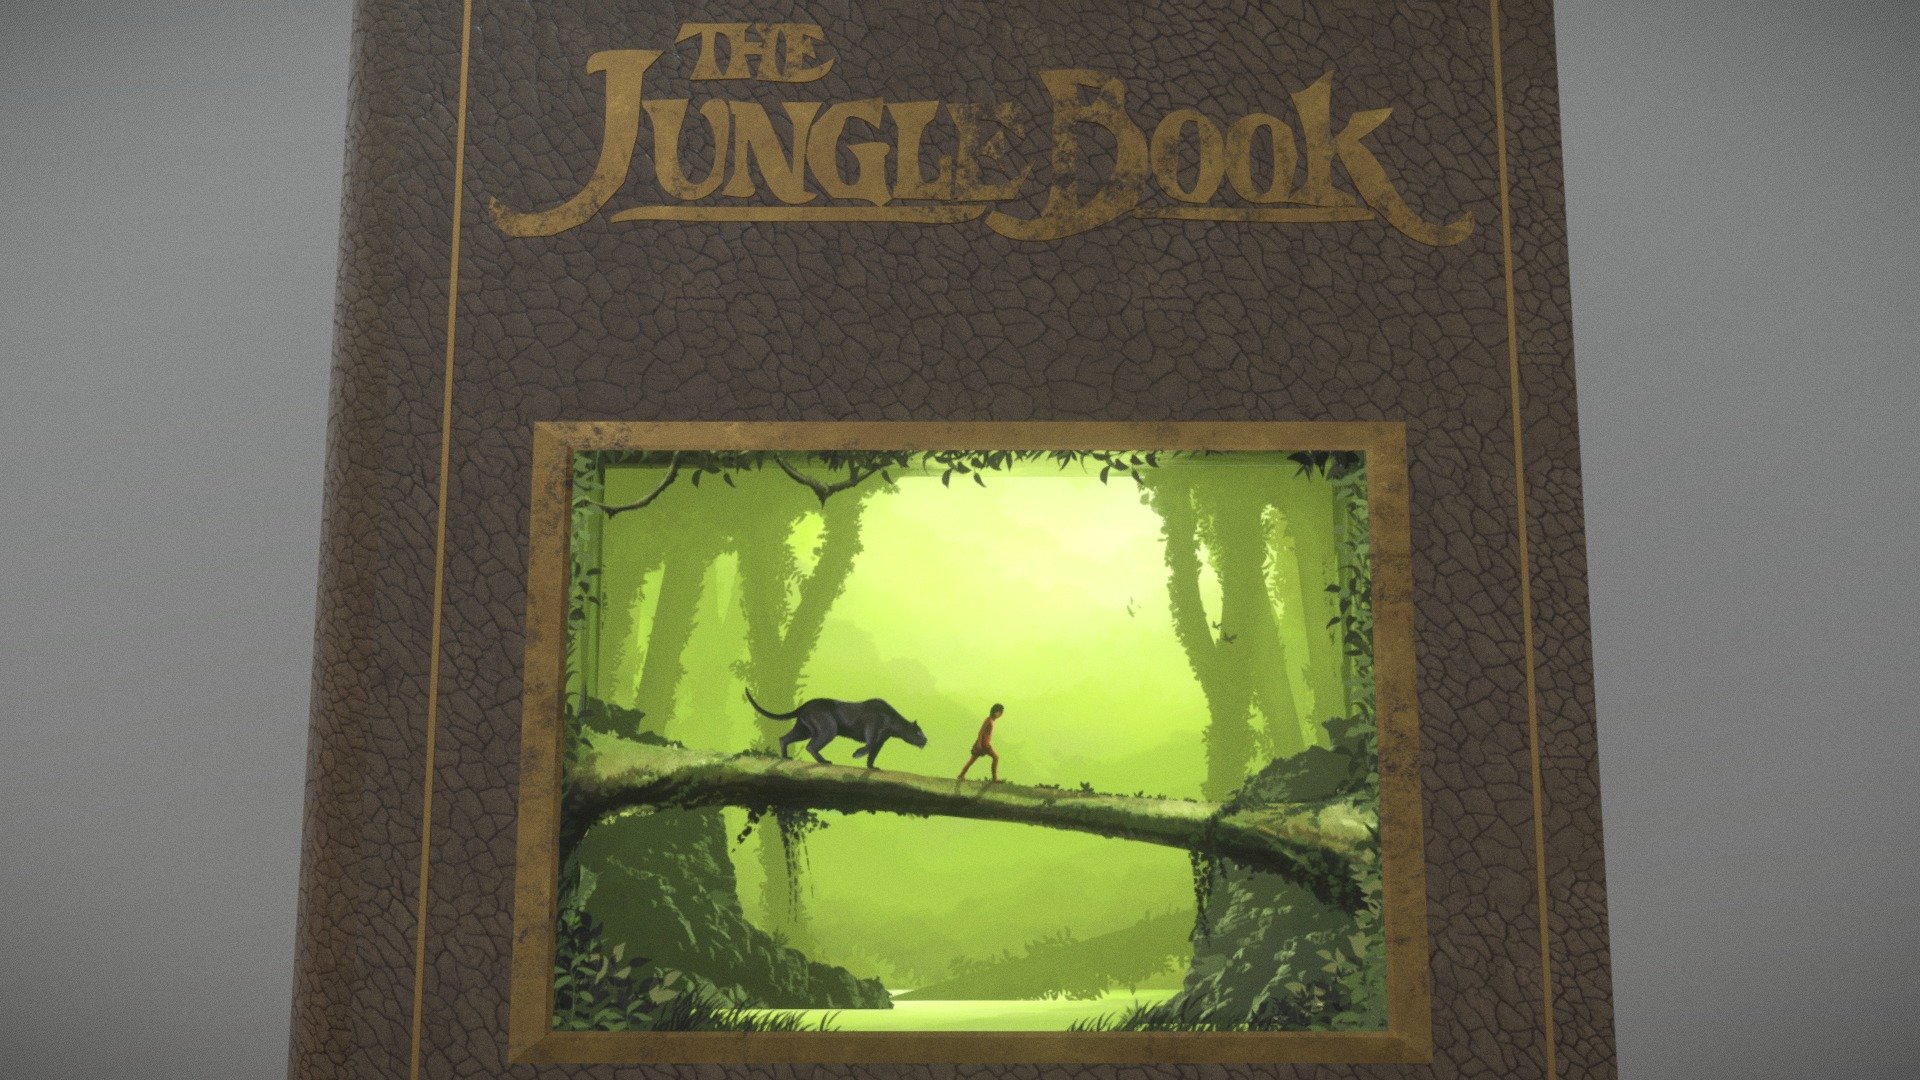 The Jungle Book download the new for apple